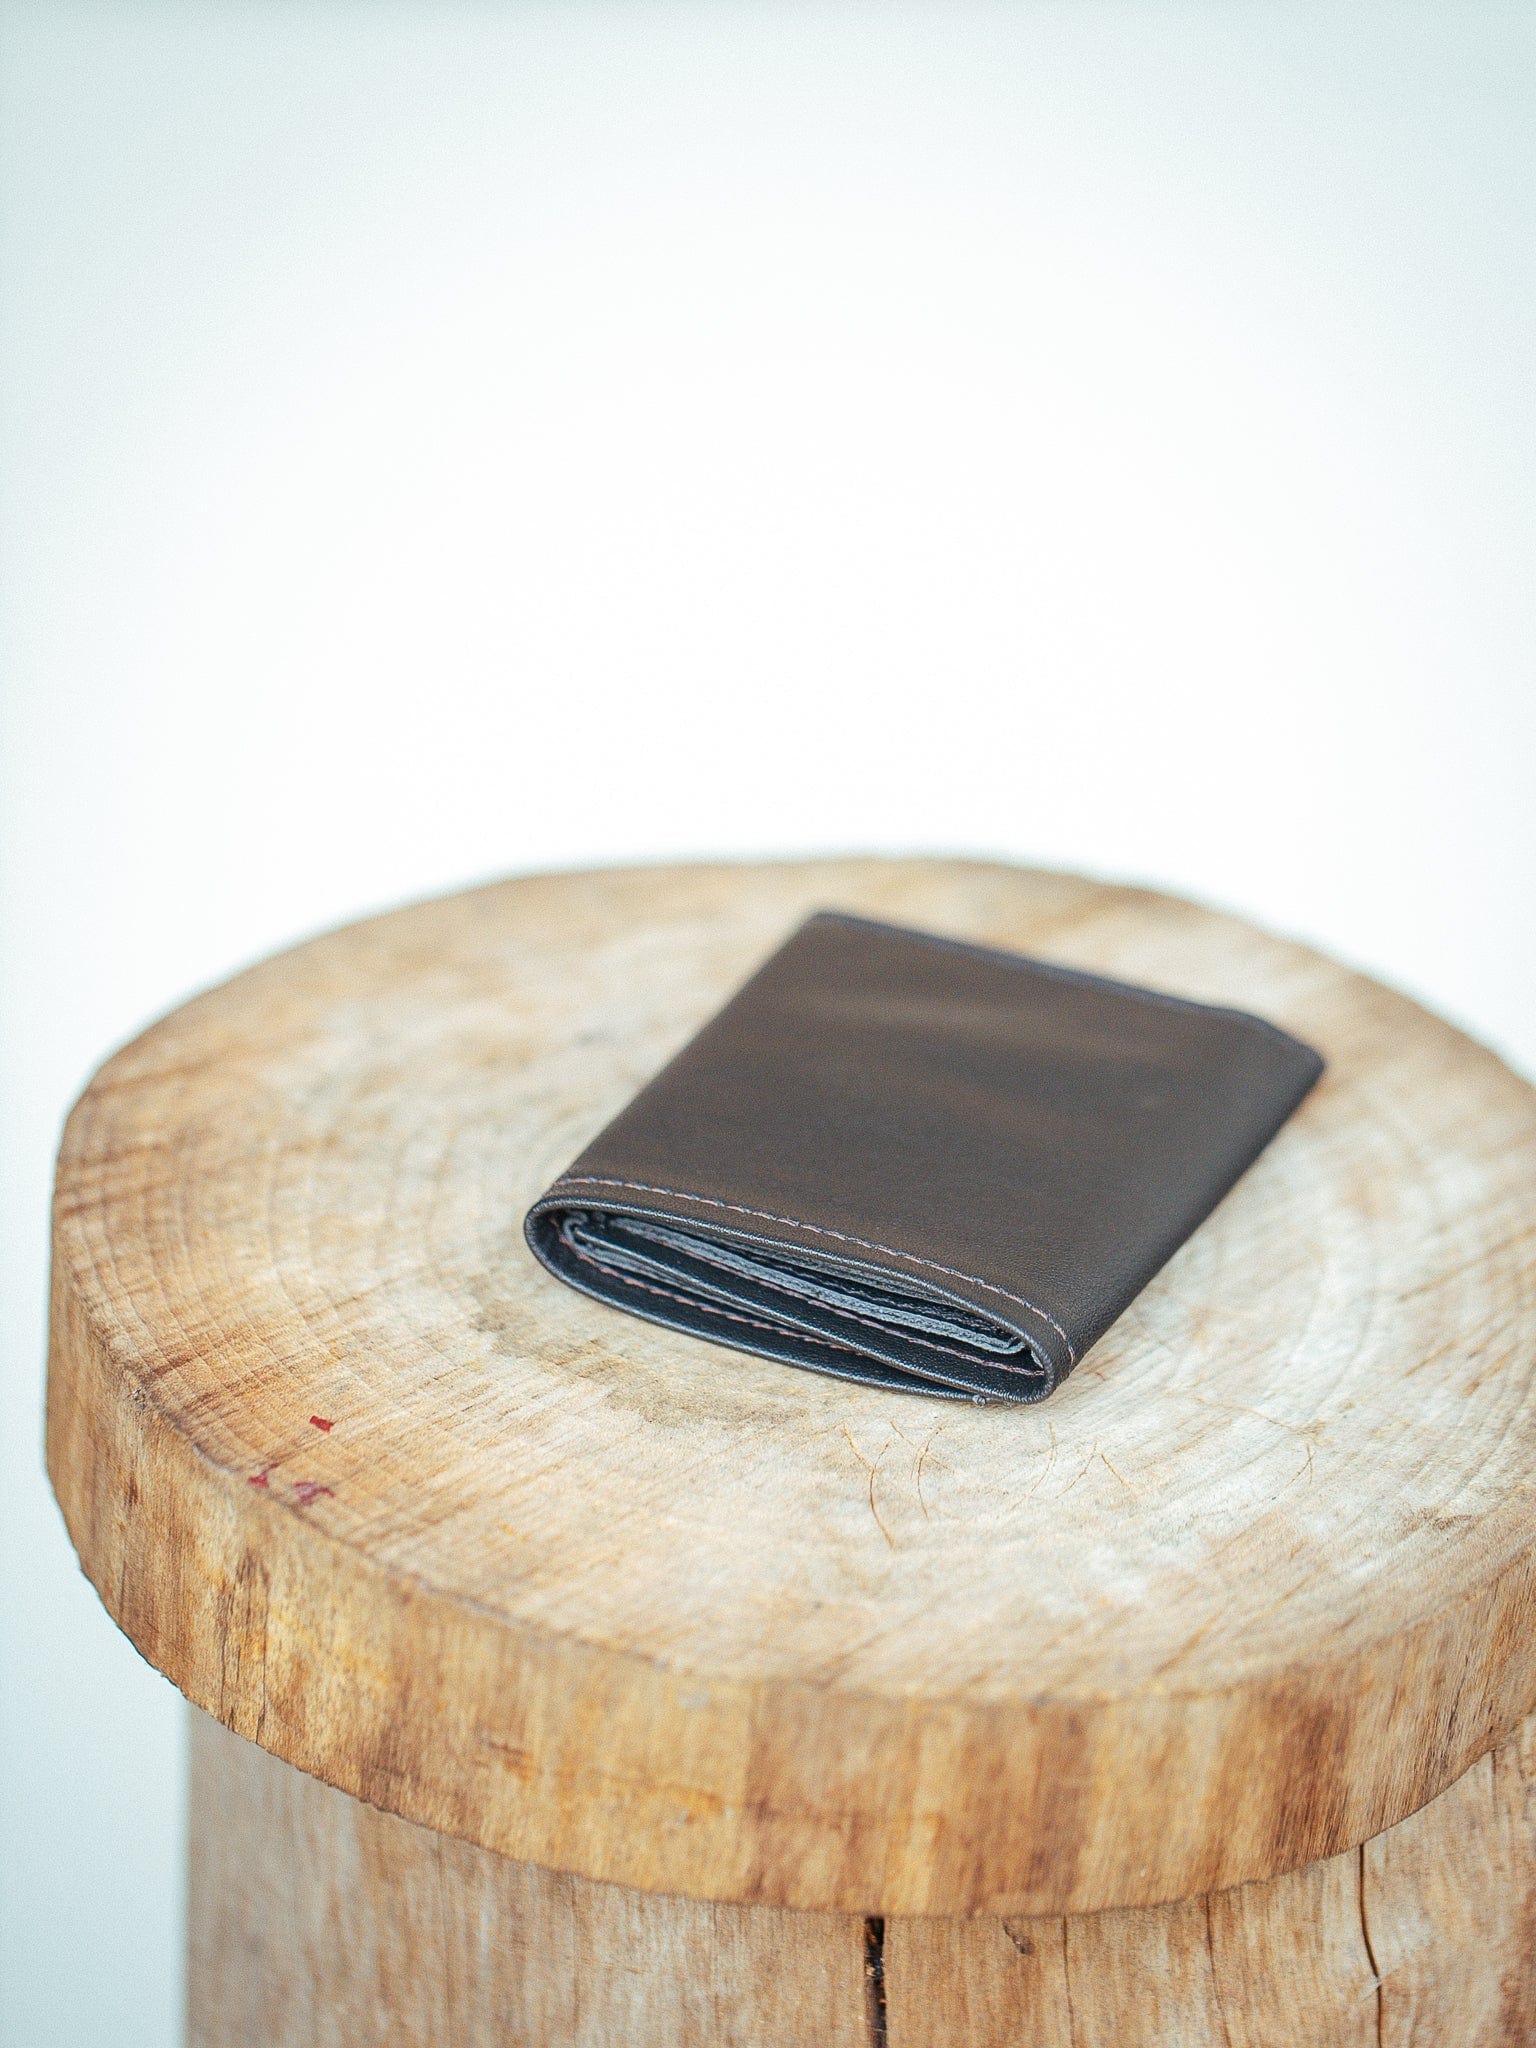 The Real McCaul Wallets Deluxe Trifold Wallet - Cowhide Australian Made Australian Owned Tri-Fold Men's Wallet - MADE IN AUSTRALIA - Kangaroo & Cowhide Nappa